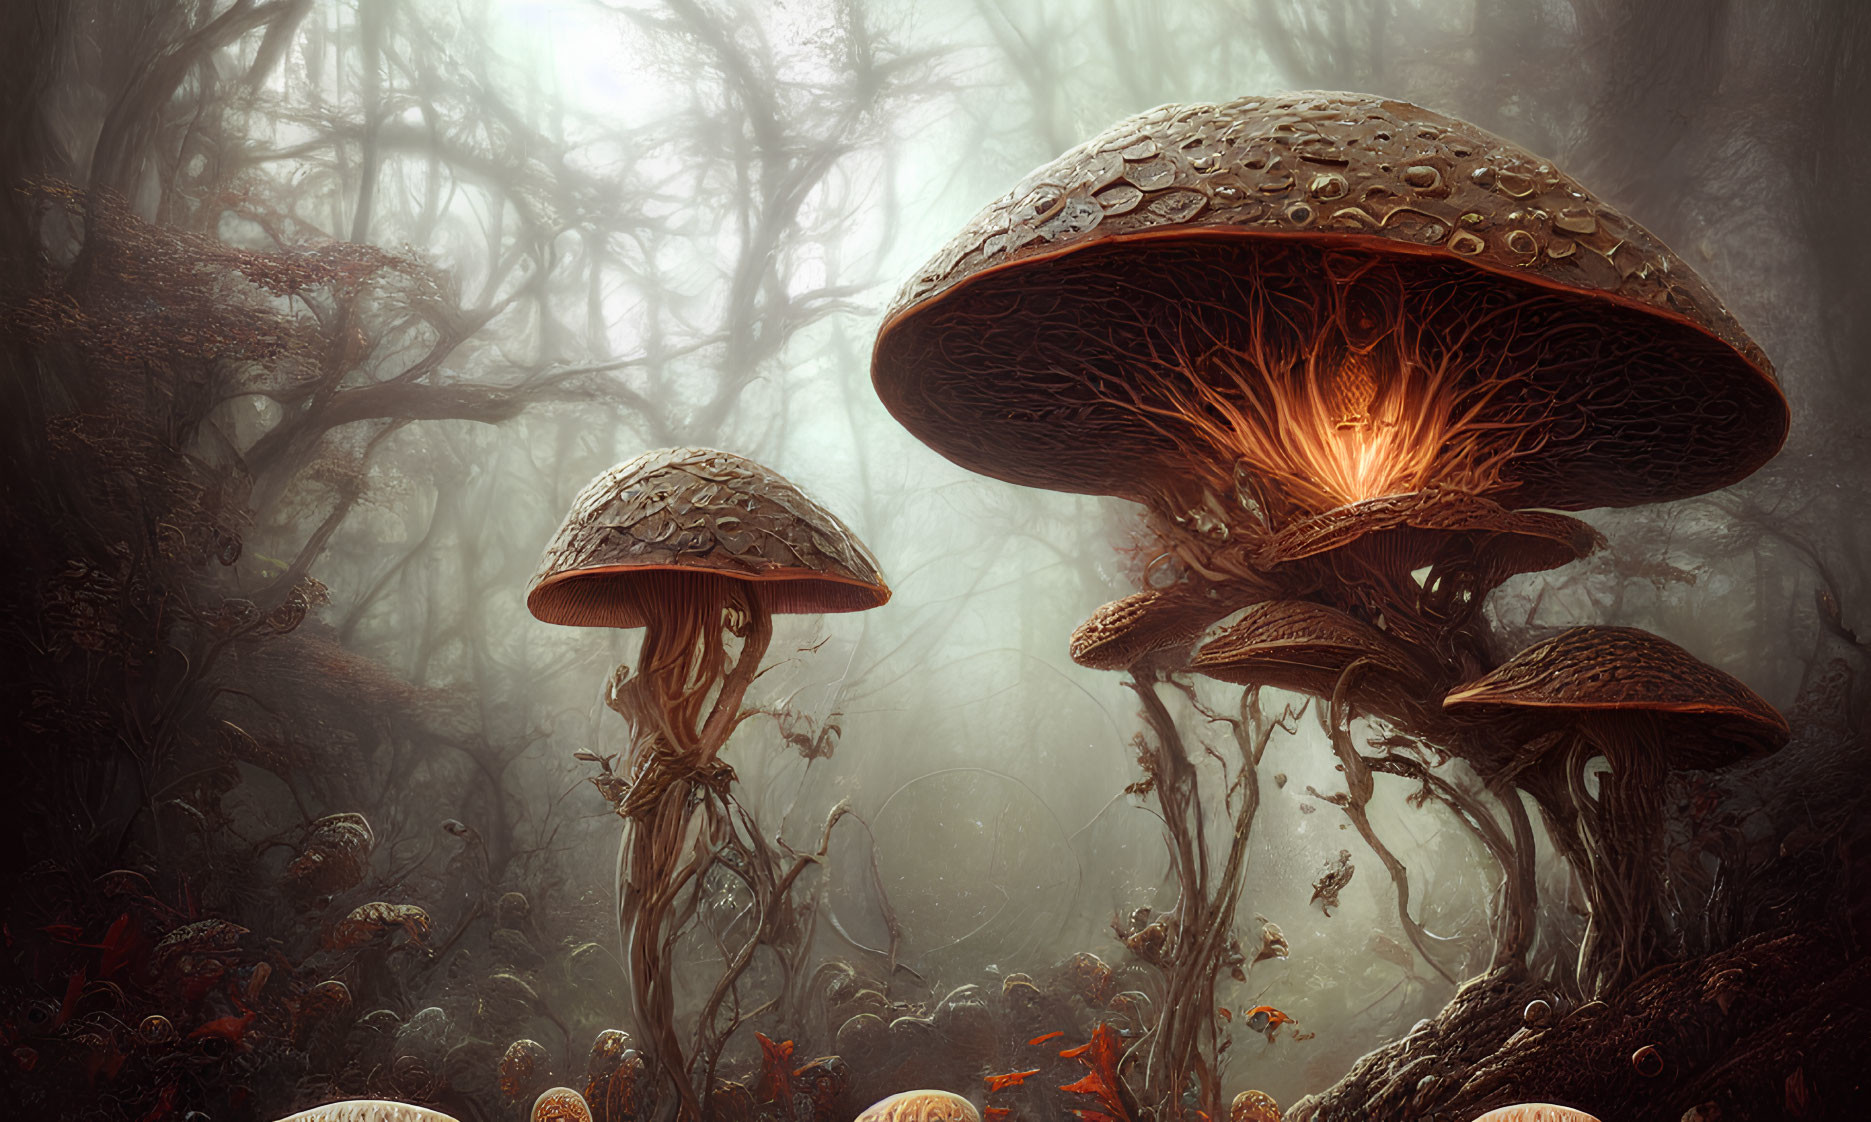 Enchanted forest with oversized glowing mushrooms in foggy setting